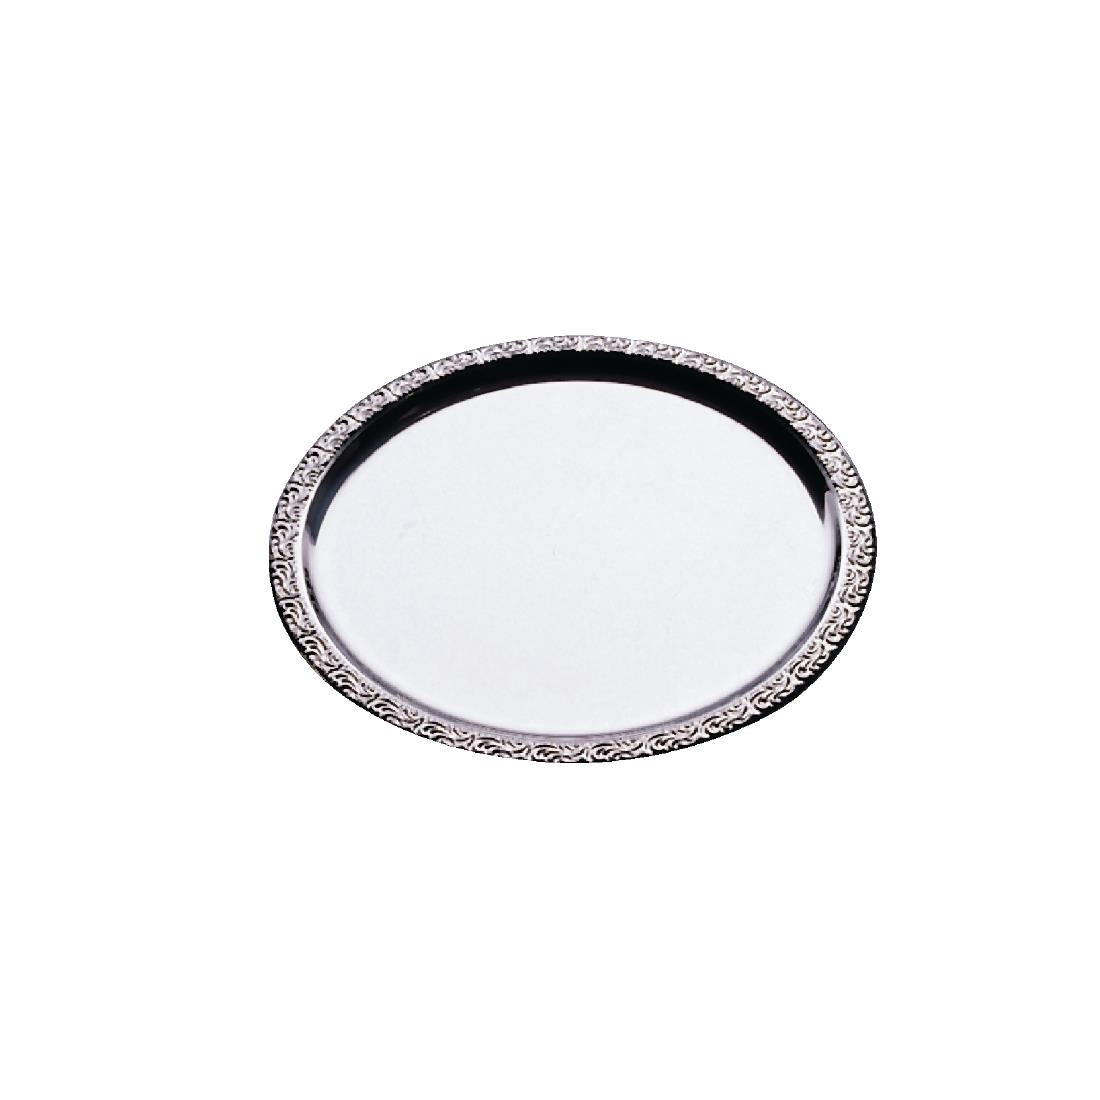 P003 APS Stainless Steel Round Service Tray 350mm